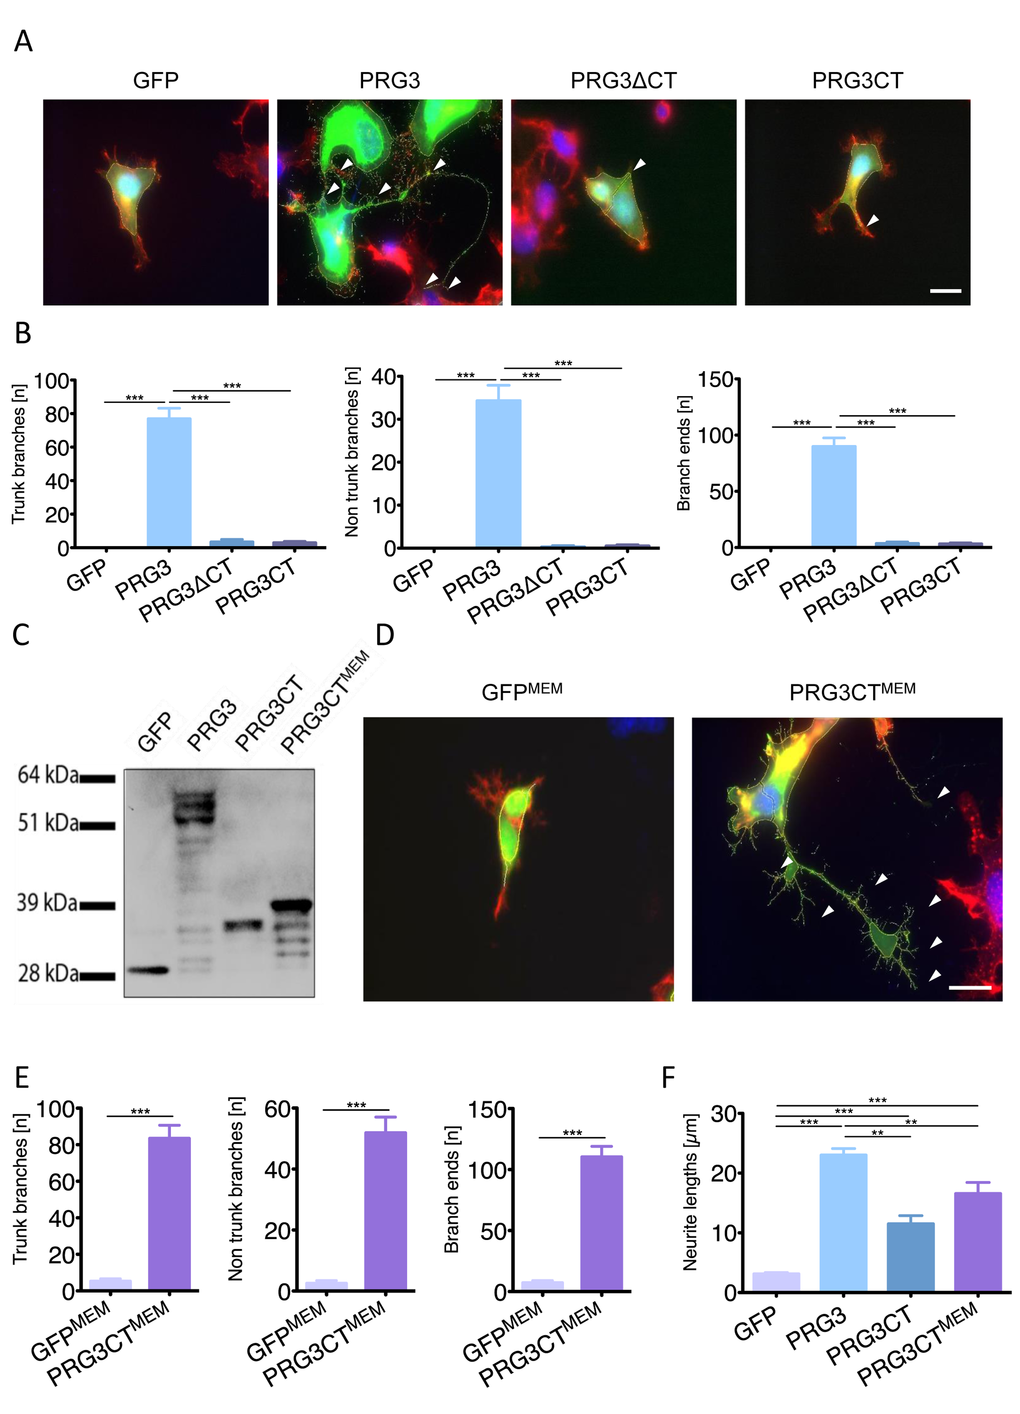 Plasma membrane localization of the PRG3 C-terminal domain is essential for axon outgrowth. (A) PRG3 overexpression induces neurite outgrowth (PRG3, arrows) in comparison to controls (GFP). A truncated PRG3 construct of its C-terminal domain (PRG3ΔCT) and a truncated PRG3 construct consisting of solely the C-terminus (PRG3CT) was compared. Expression of PRG3ΔCT and PRG3CT induces solely a few neurites comparable to controls arrowheads). Scale bar represents 20 µm. (B) Quantification of trunk, non-trunk branches and branch ends in controls (GFP), PRG3, PRG3ΔCT and PRG3CT. Data are given as mean ± SEM from three independent experiments. Statistical differences were analysed by one way anova with Bonferroni post hoc analysis. P value was set as * = pC) Total cell lysates from neuronal cells transfected with GFP or GFP fusion constructs, PRG3, PRG3CT, and PRG3CTMEM were examined by immunoblotting using GFP-specific antibody. PRG3CTMEM shows slight protein weight gain compared to PRG3CT due to the membrane myristoylation consensus tag (YES). (D) Comparison of membrane associated GFP (GFPMEM) and PRG3CTMEM in neuronal cells. Note the increase in neurites and filopodia in PRG3CTMEM expressing neurons compared to GFPMEM controls (arrowheads, scale bar shows 20 µm). (E) Quantification of axonal branches, non-trunk branches and branch ends of GFPMEM and PRG3CTMEM expressing neurons. Values are given from three independent experiments and statistical analysis was performed using two tailed student’s t-test. Error bars are given as ± SEM from three independent experiments of each group. (F) Comparison of total neurite length between different expression clones. Statistical analysis was performed one way anova with Bonferroni post hoc analysis for multiple comparisons; * p